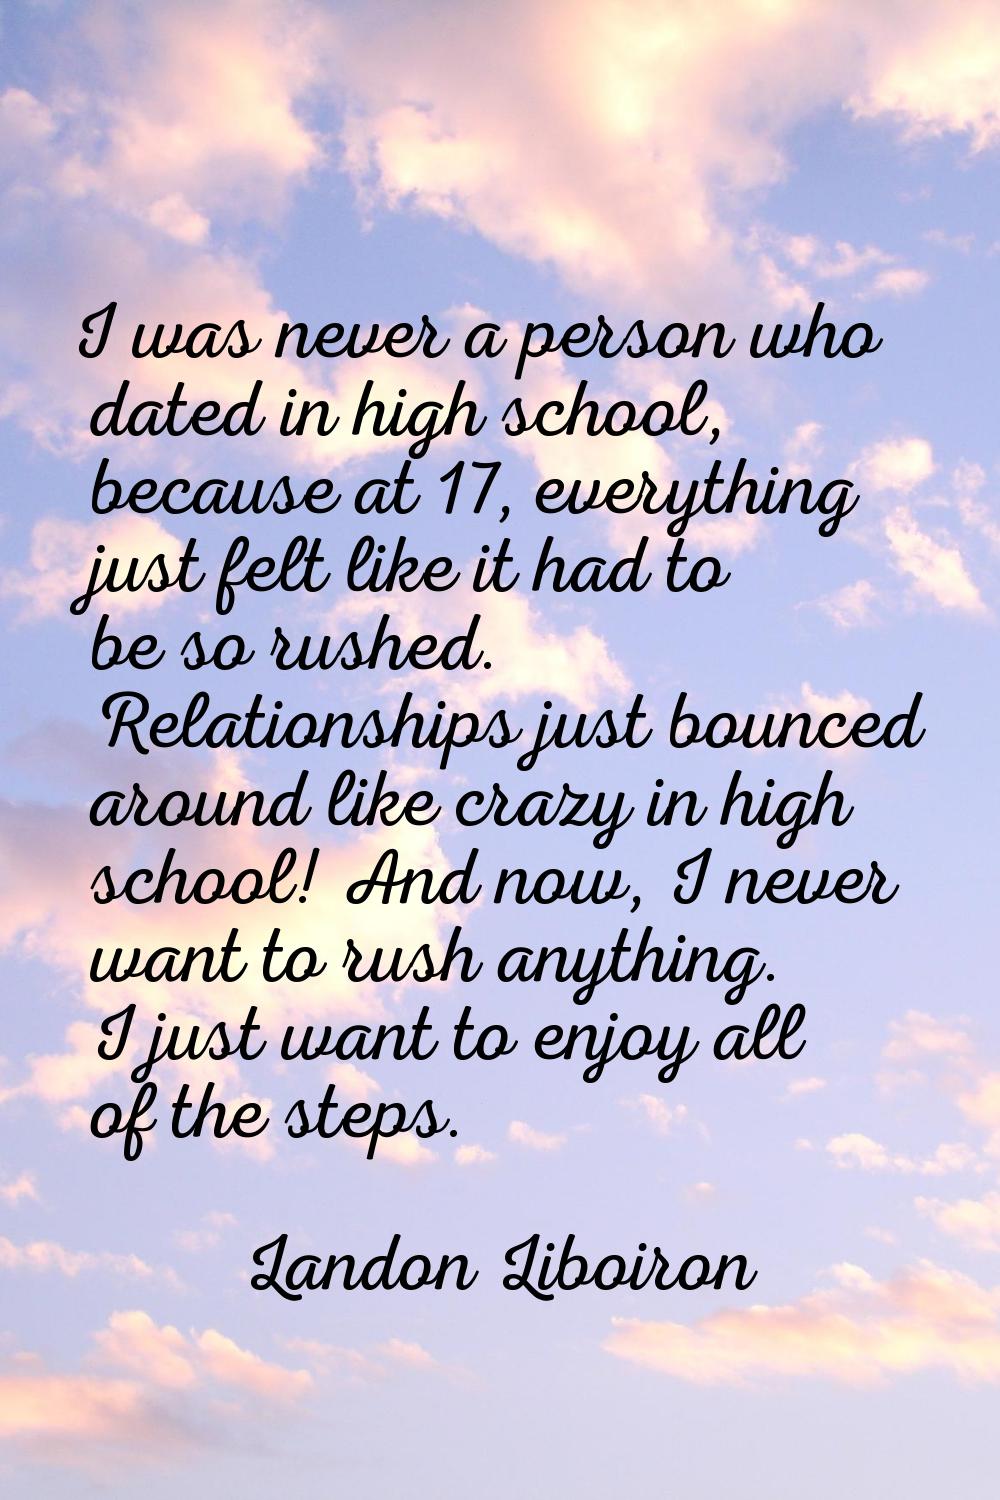 I was never a person who dated in high school, because at 17, everything just felt like it had to b